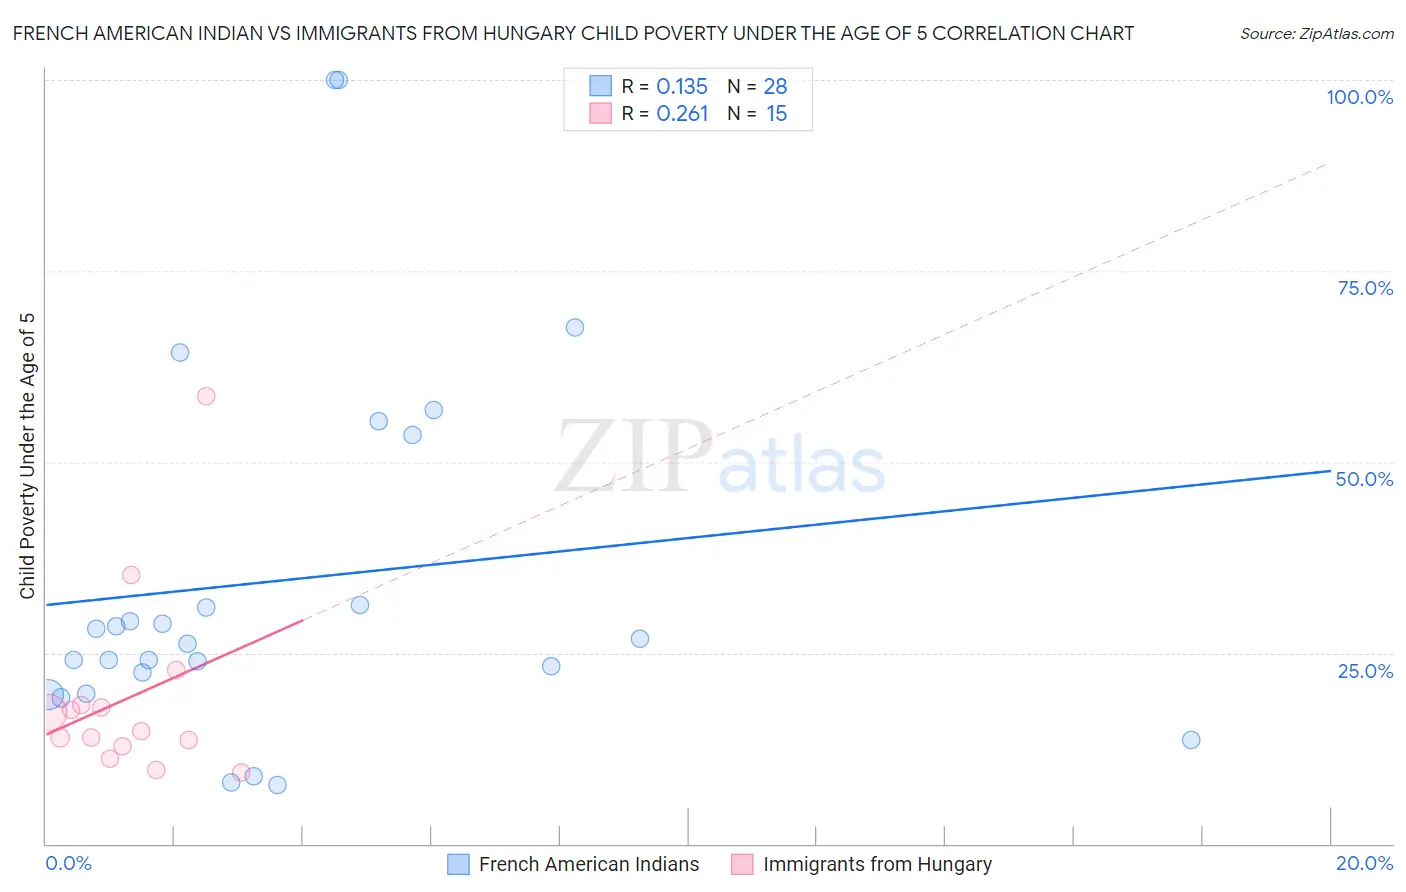 French American Indian vs Immigrants from Hungary Child Poverty Under the Age of 5